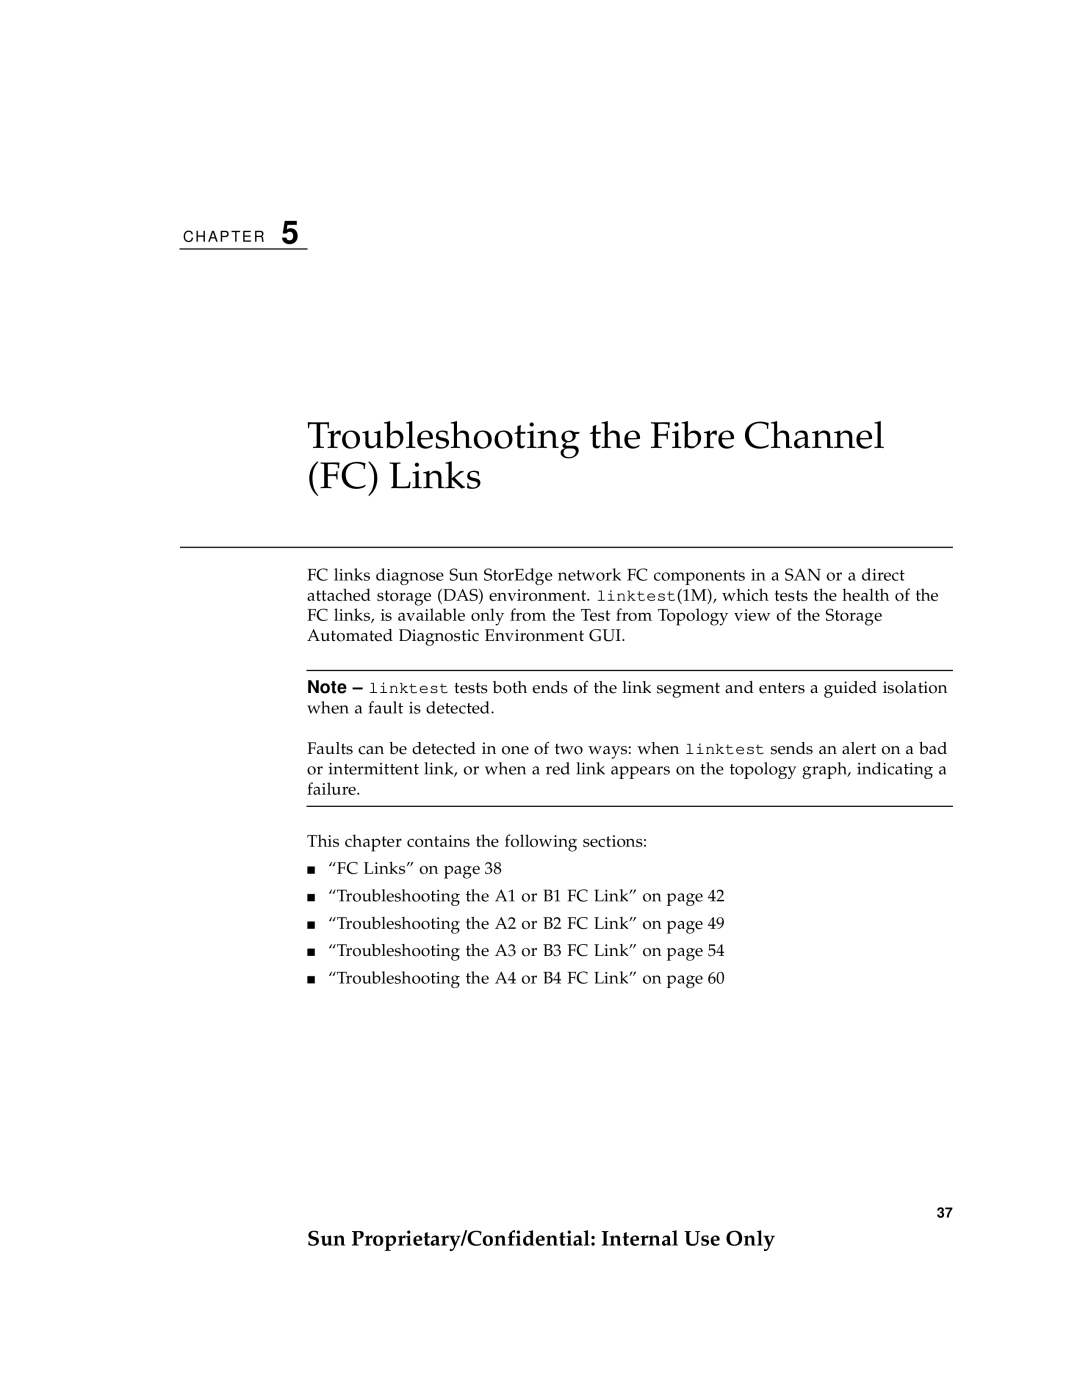 Sun Microsystems 6900, 3900 Troubleshooting the Fibre Channel FC Links, Sun Proprietary/Confidential Internal Use Only 